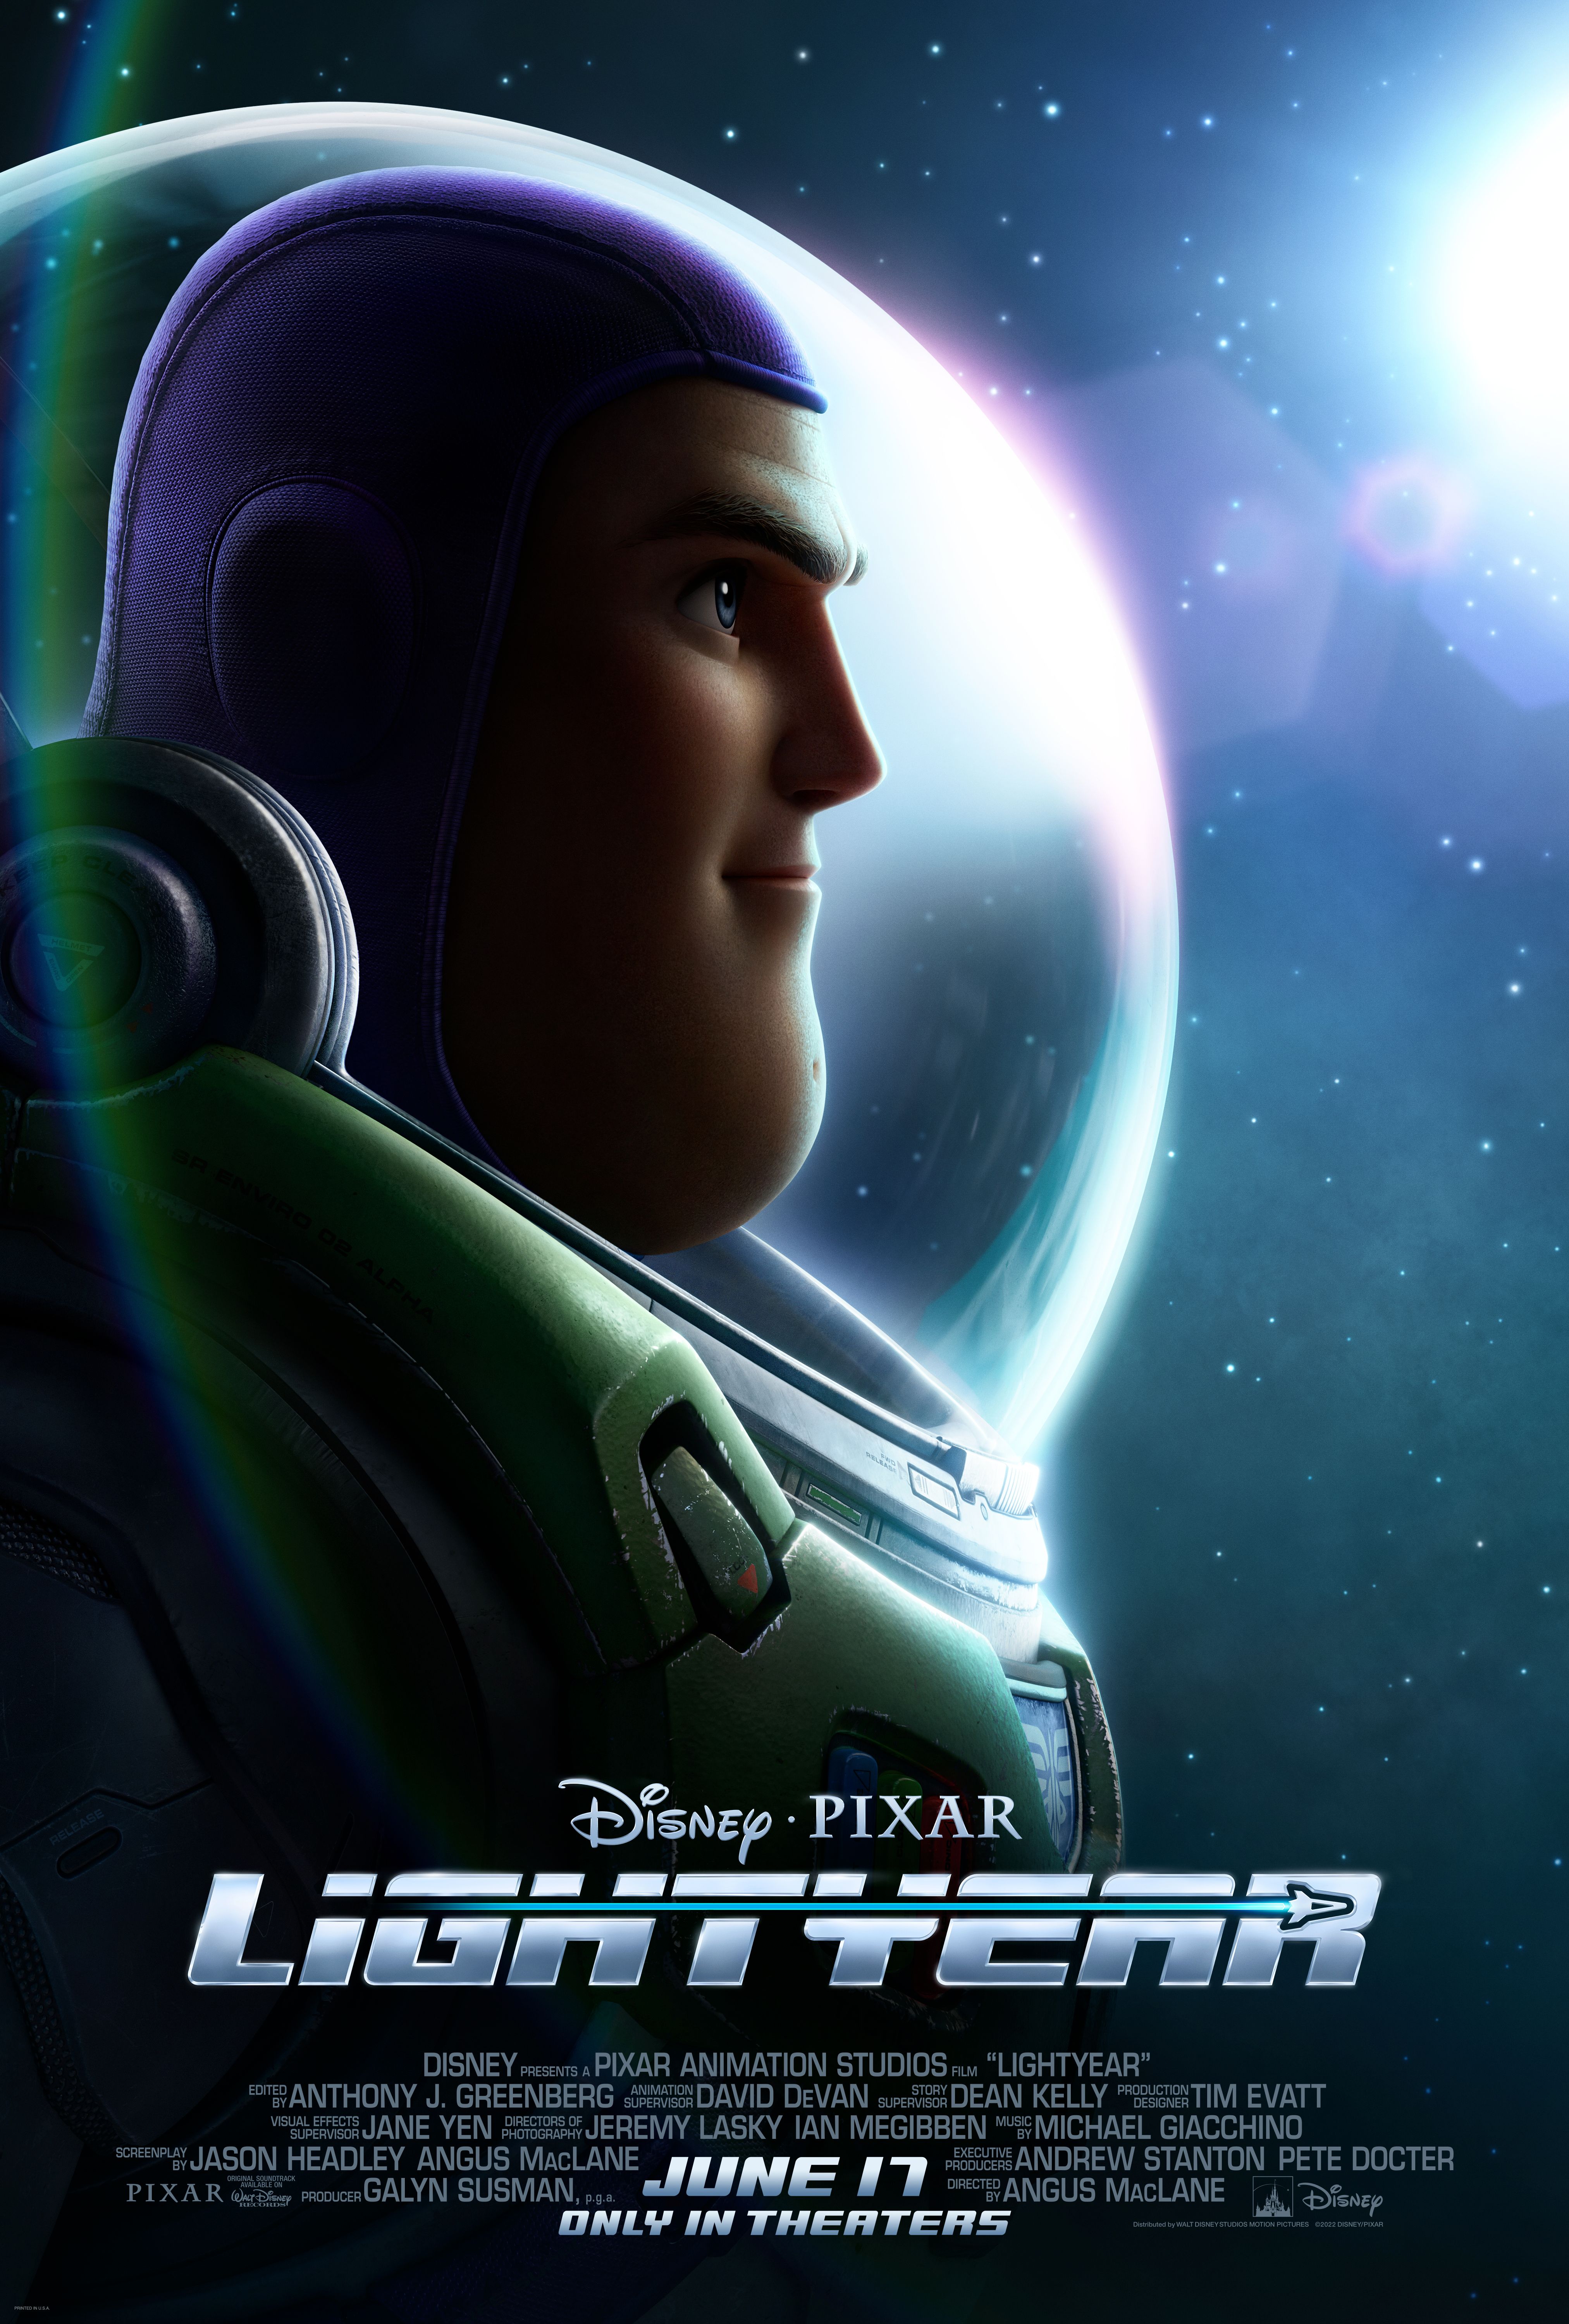 Buzz Lightyear Travels 62 Years Into The Future In New Trailer